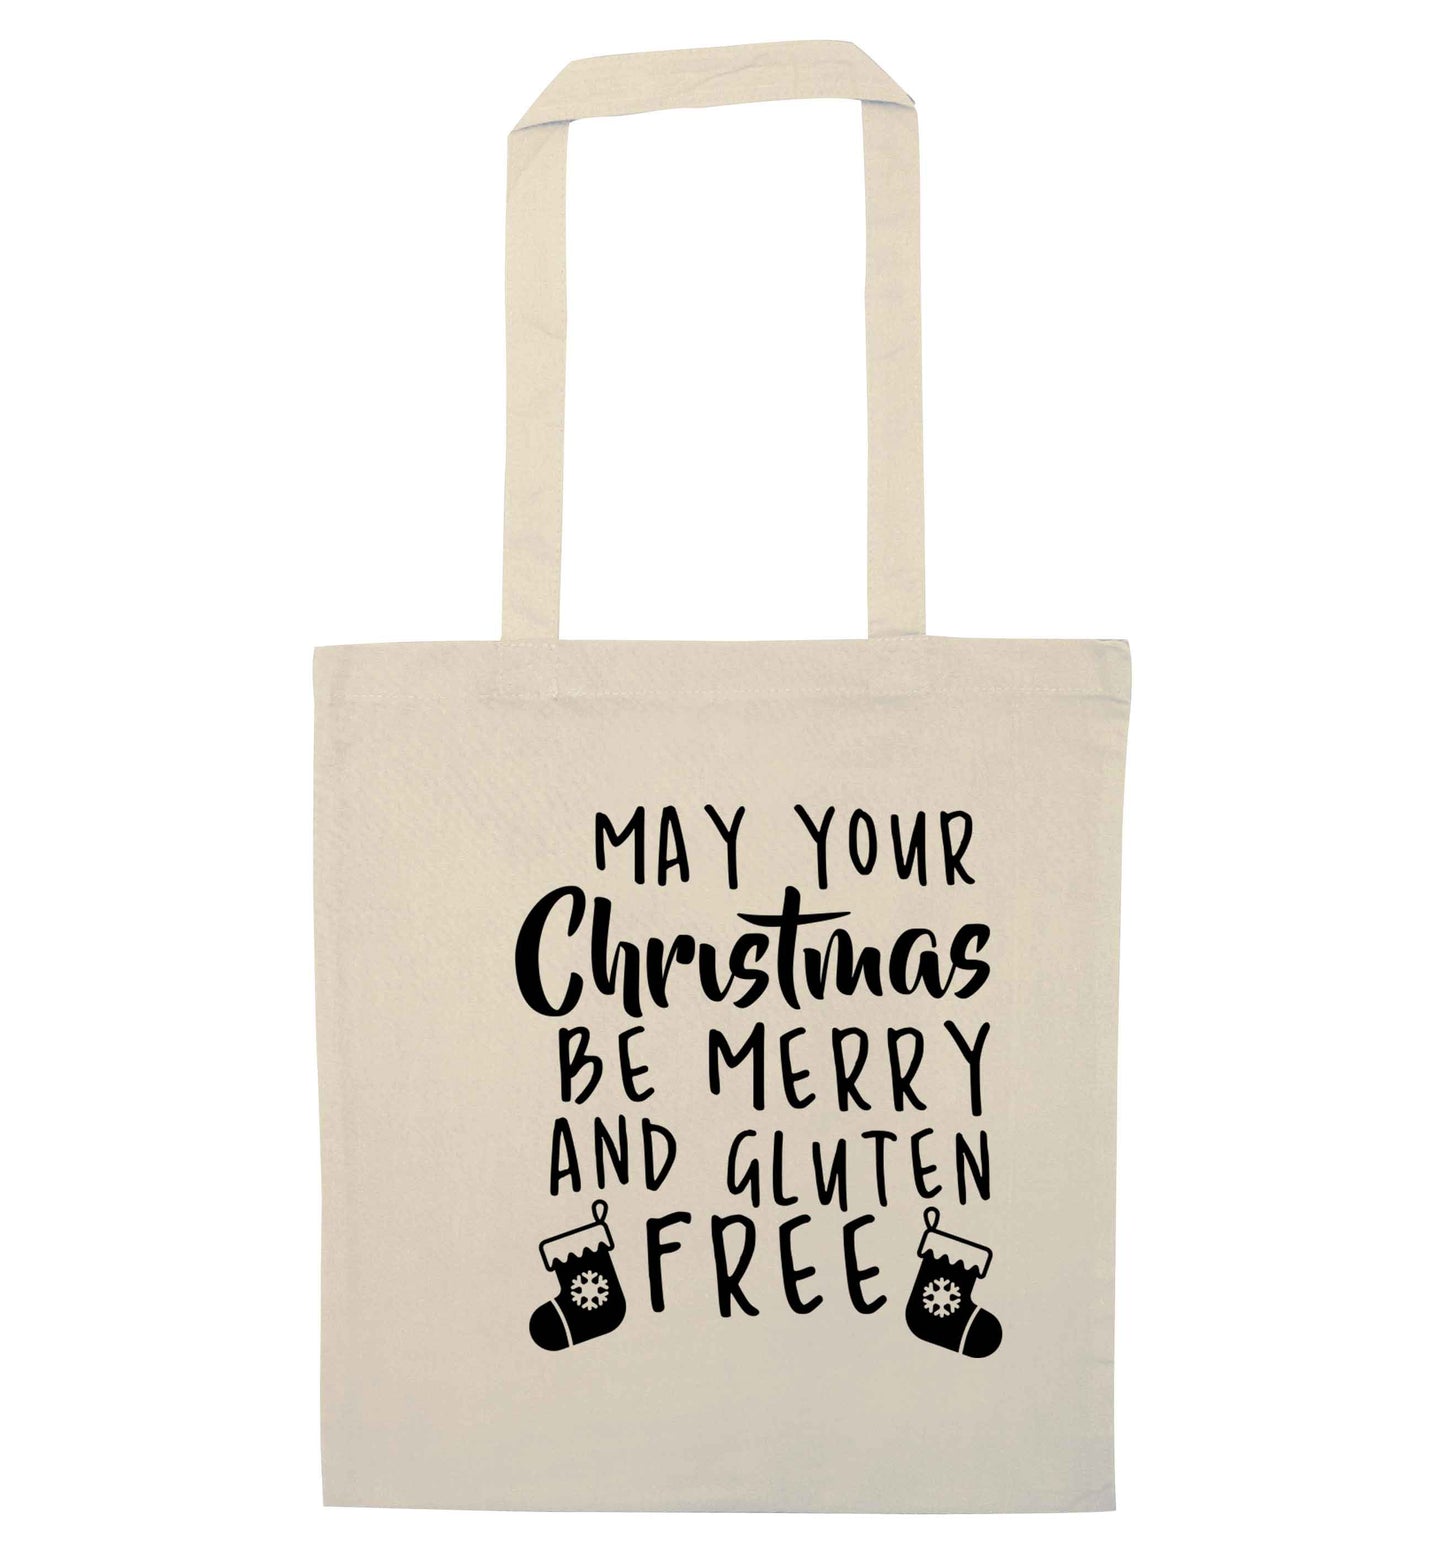 May your Christmas be merry and gluten free natural tote bag